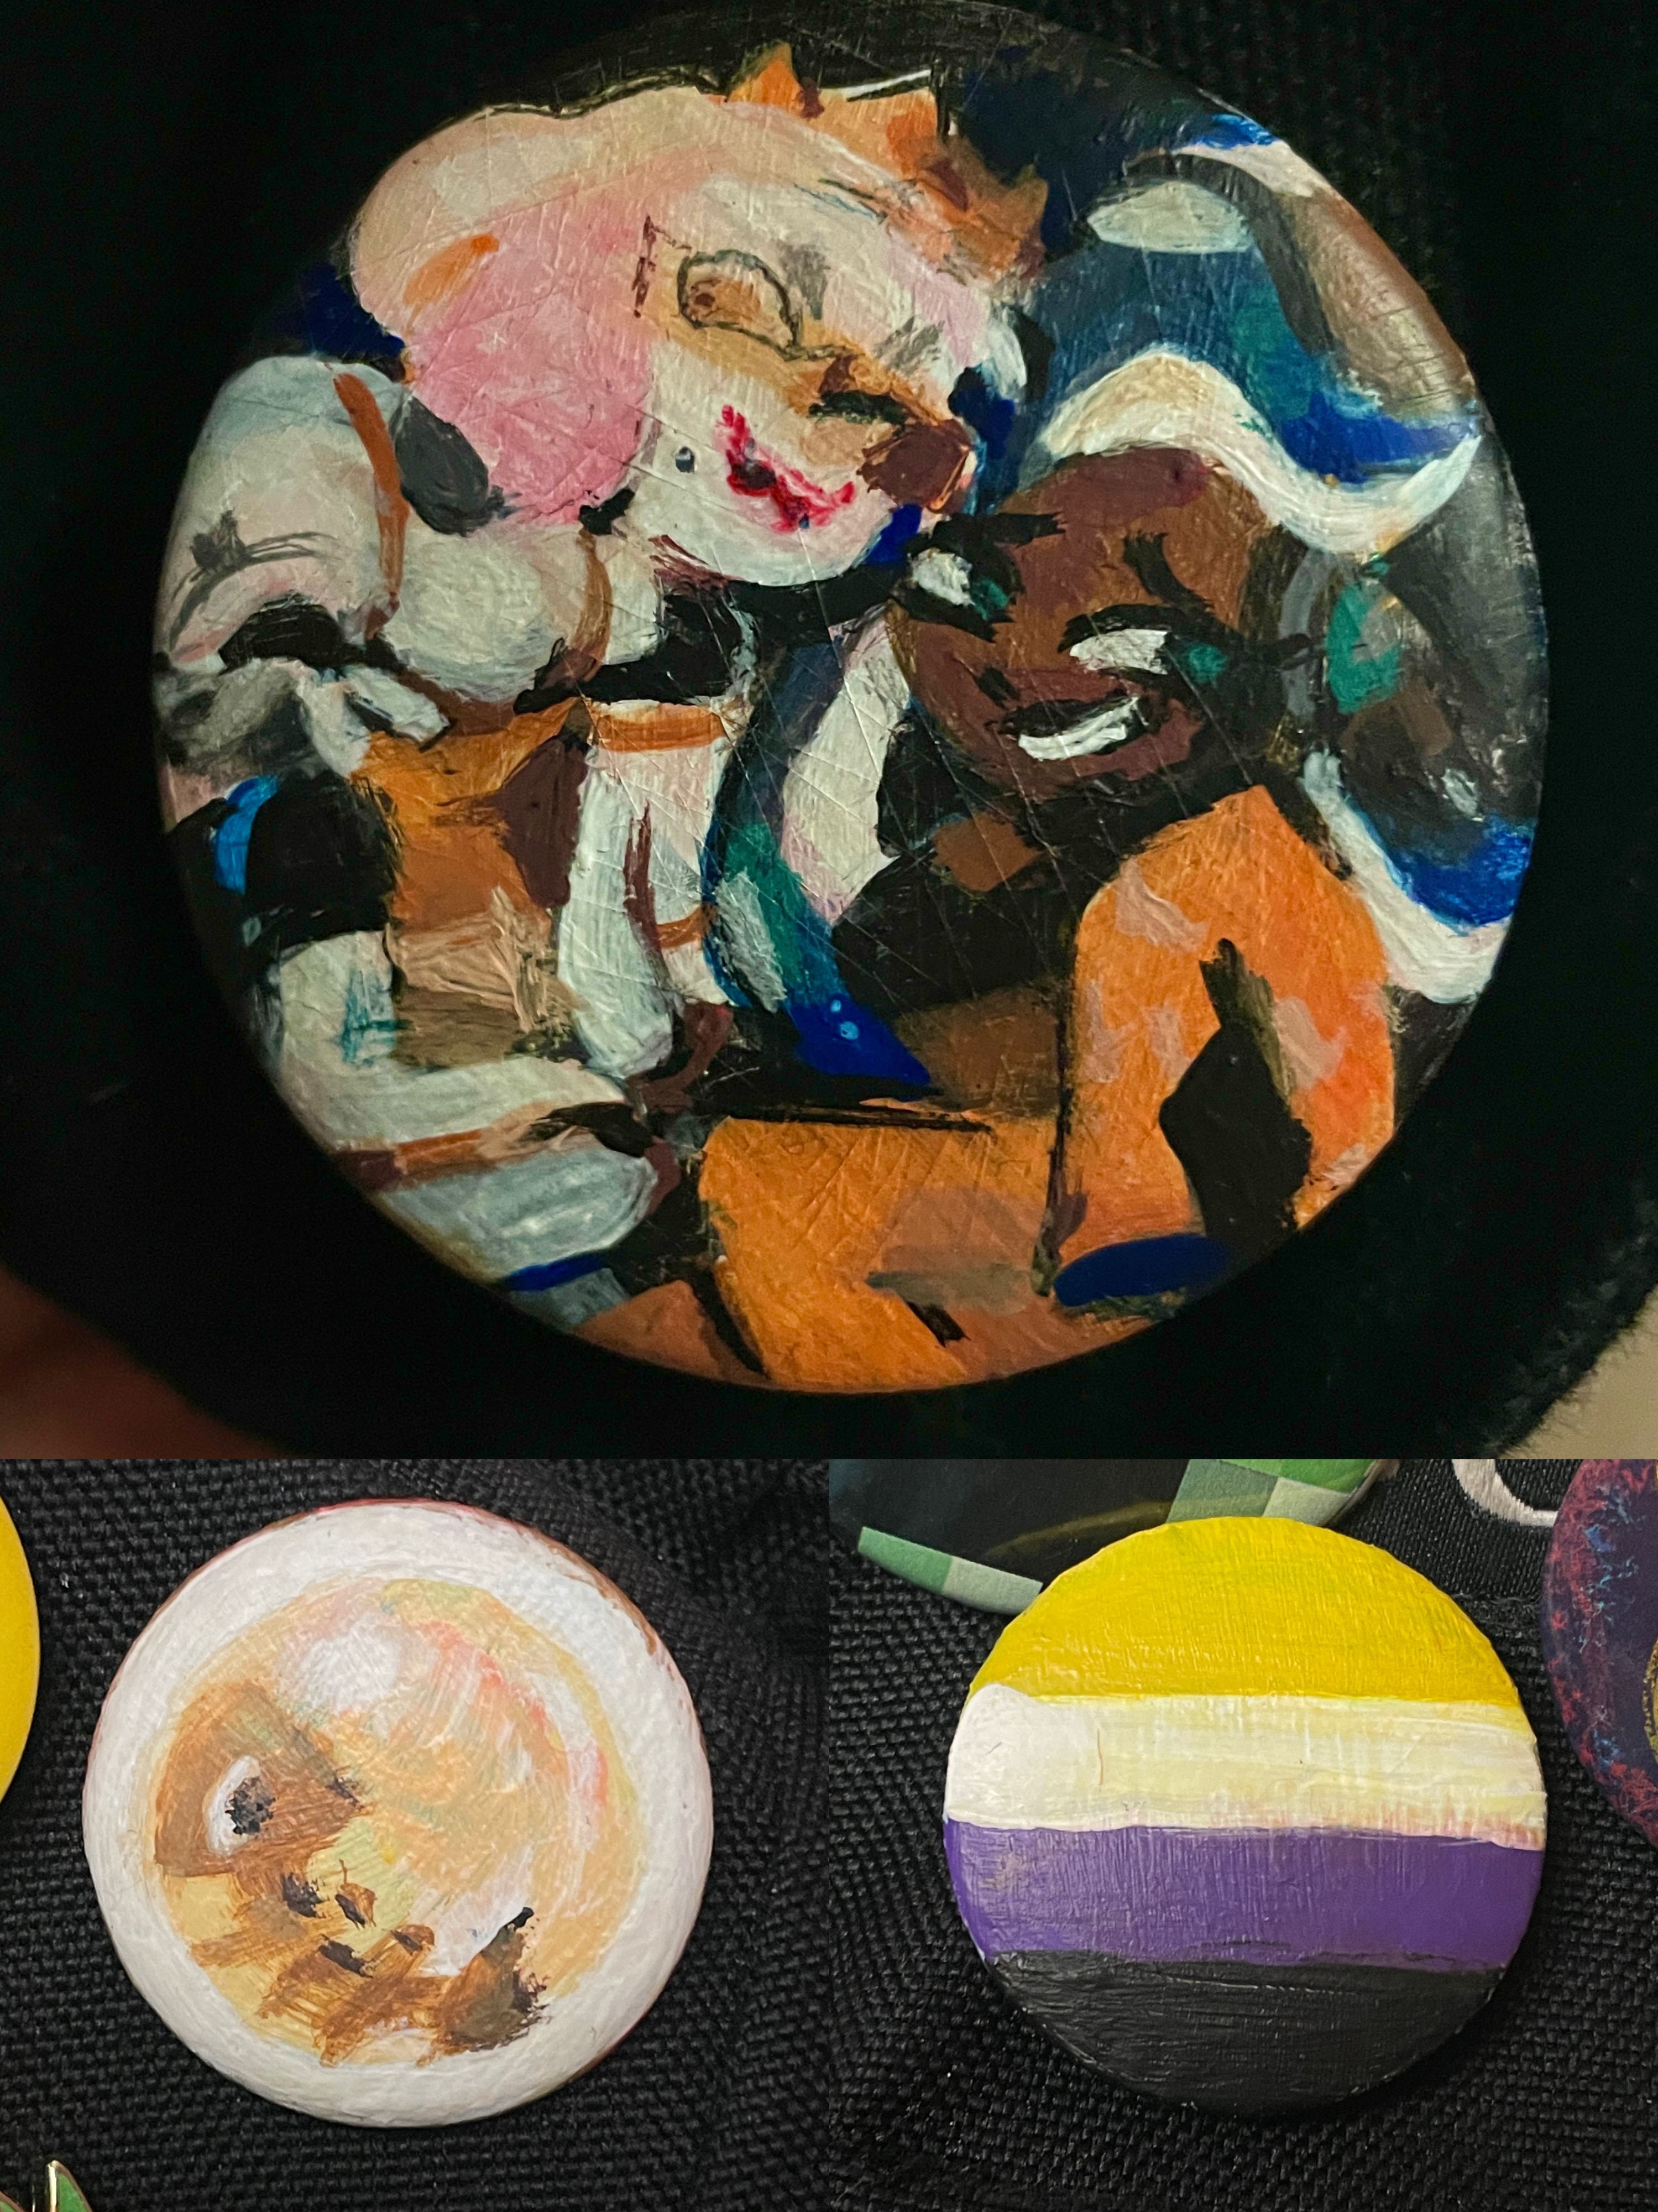 3 handpainted pins, one of pearl and marina from splatoon 3, another of the nonbinary flag, and another of a golden egg from splatoon.